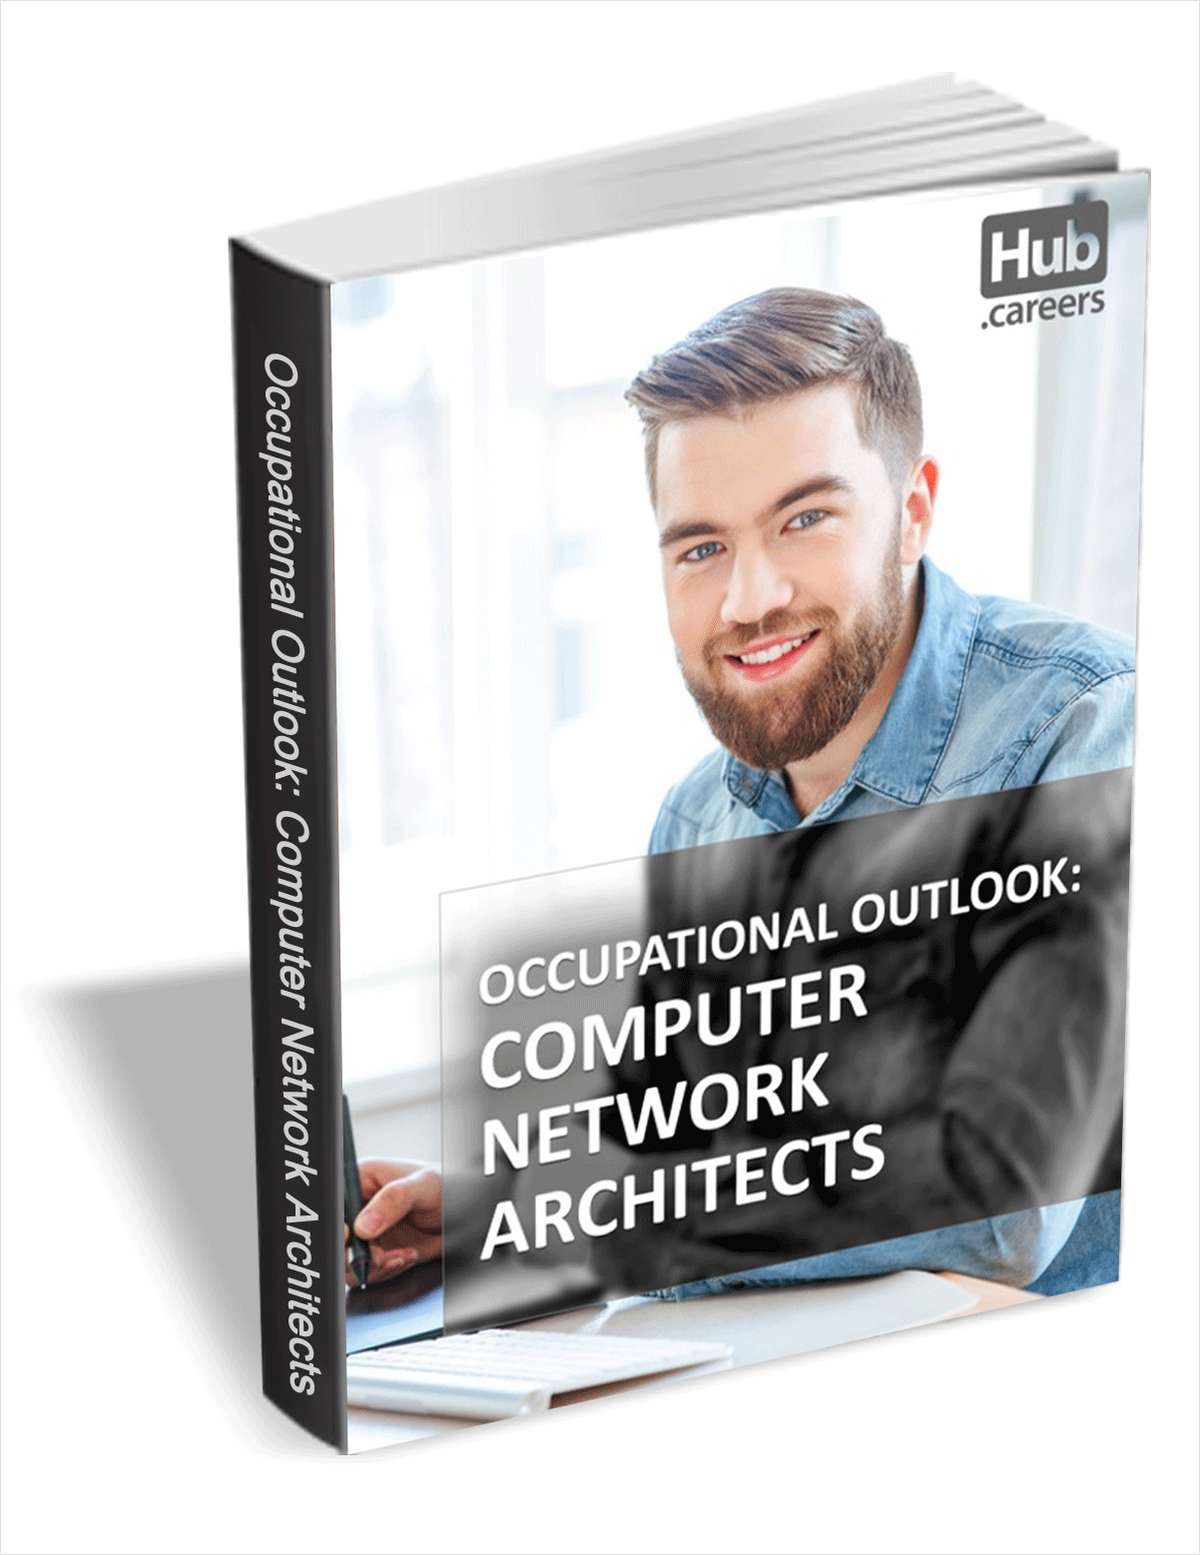 Computer Network Architects - Occupational Outlook